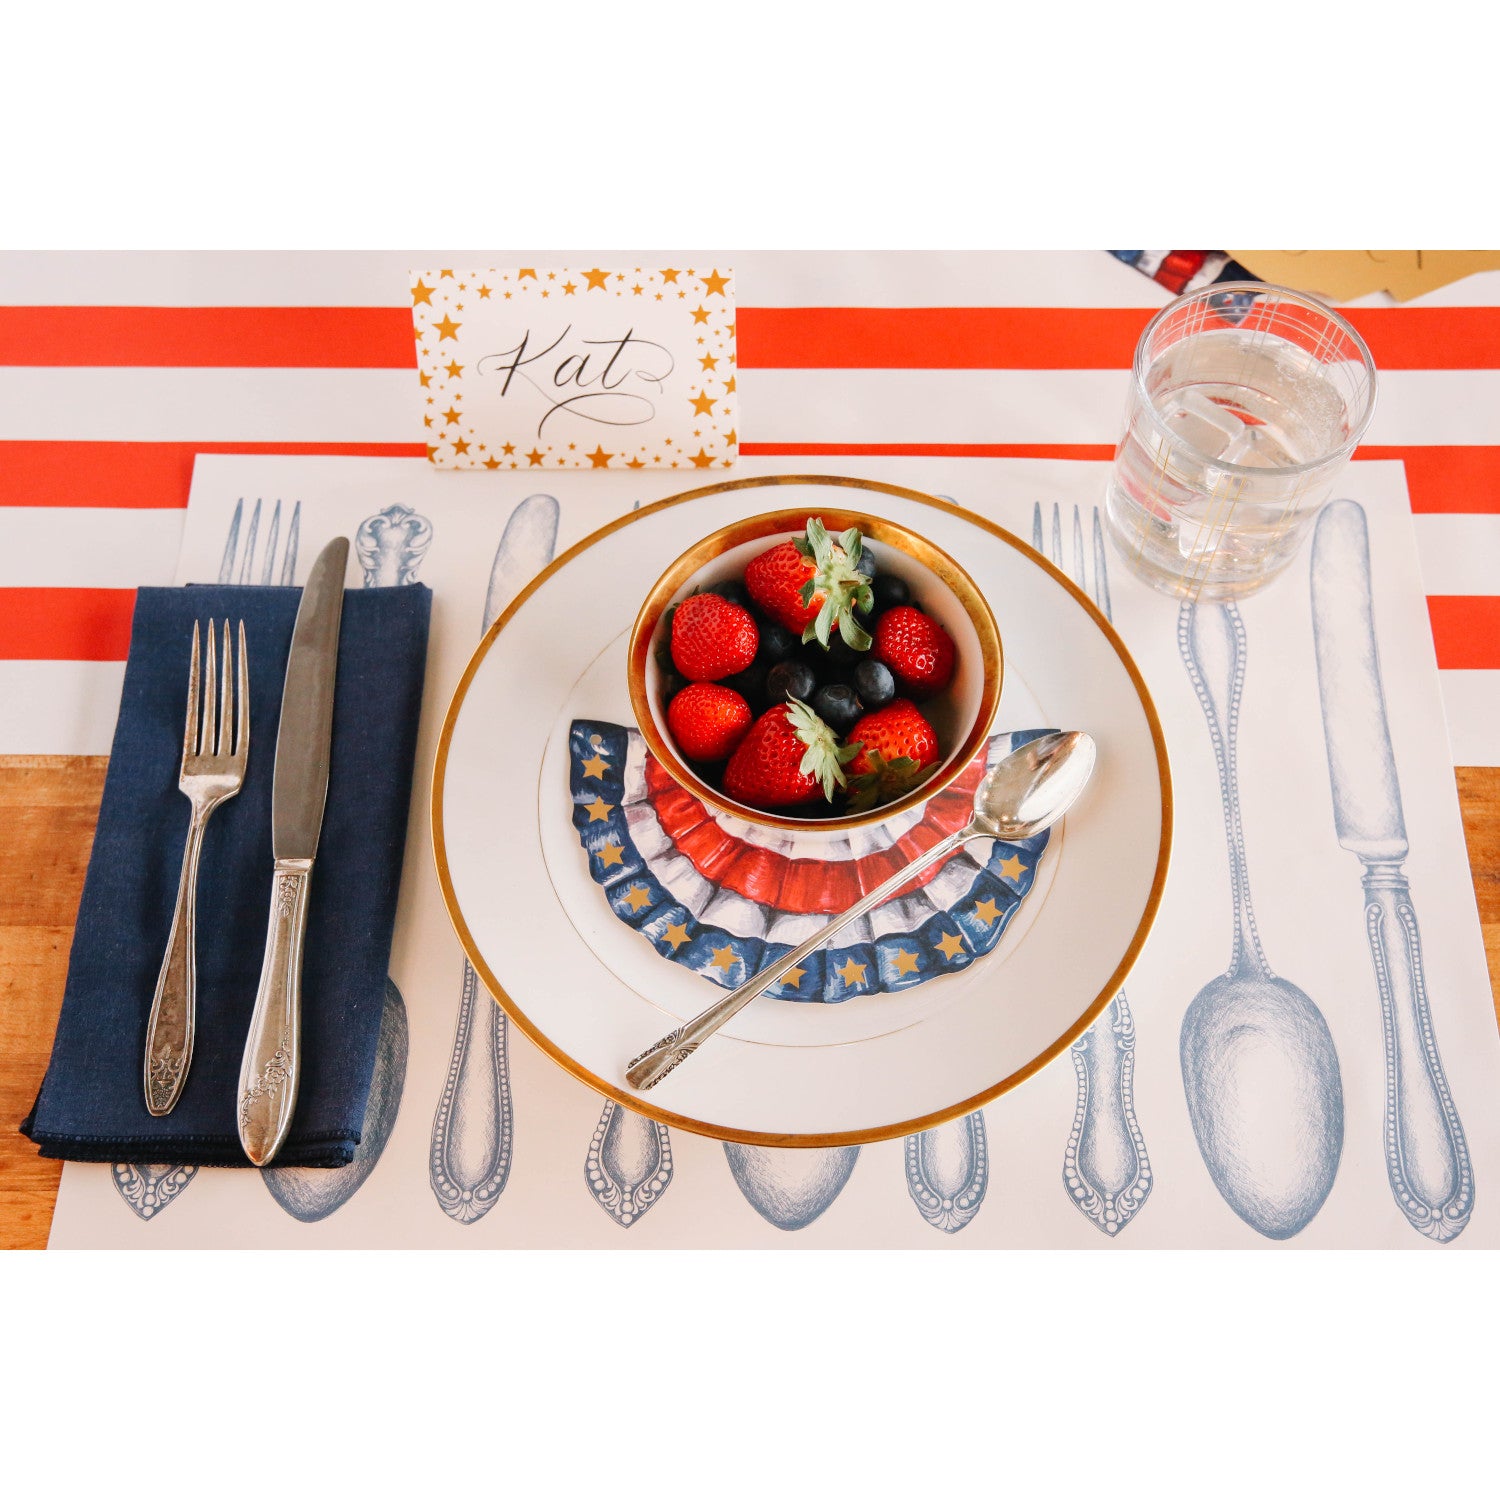 An elegant patriotic place setting featuring a Shining Star Place Card labeled &quot;Kat&quot; standing behind the plate.